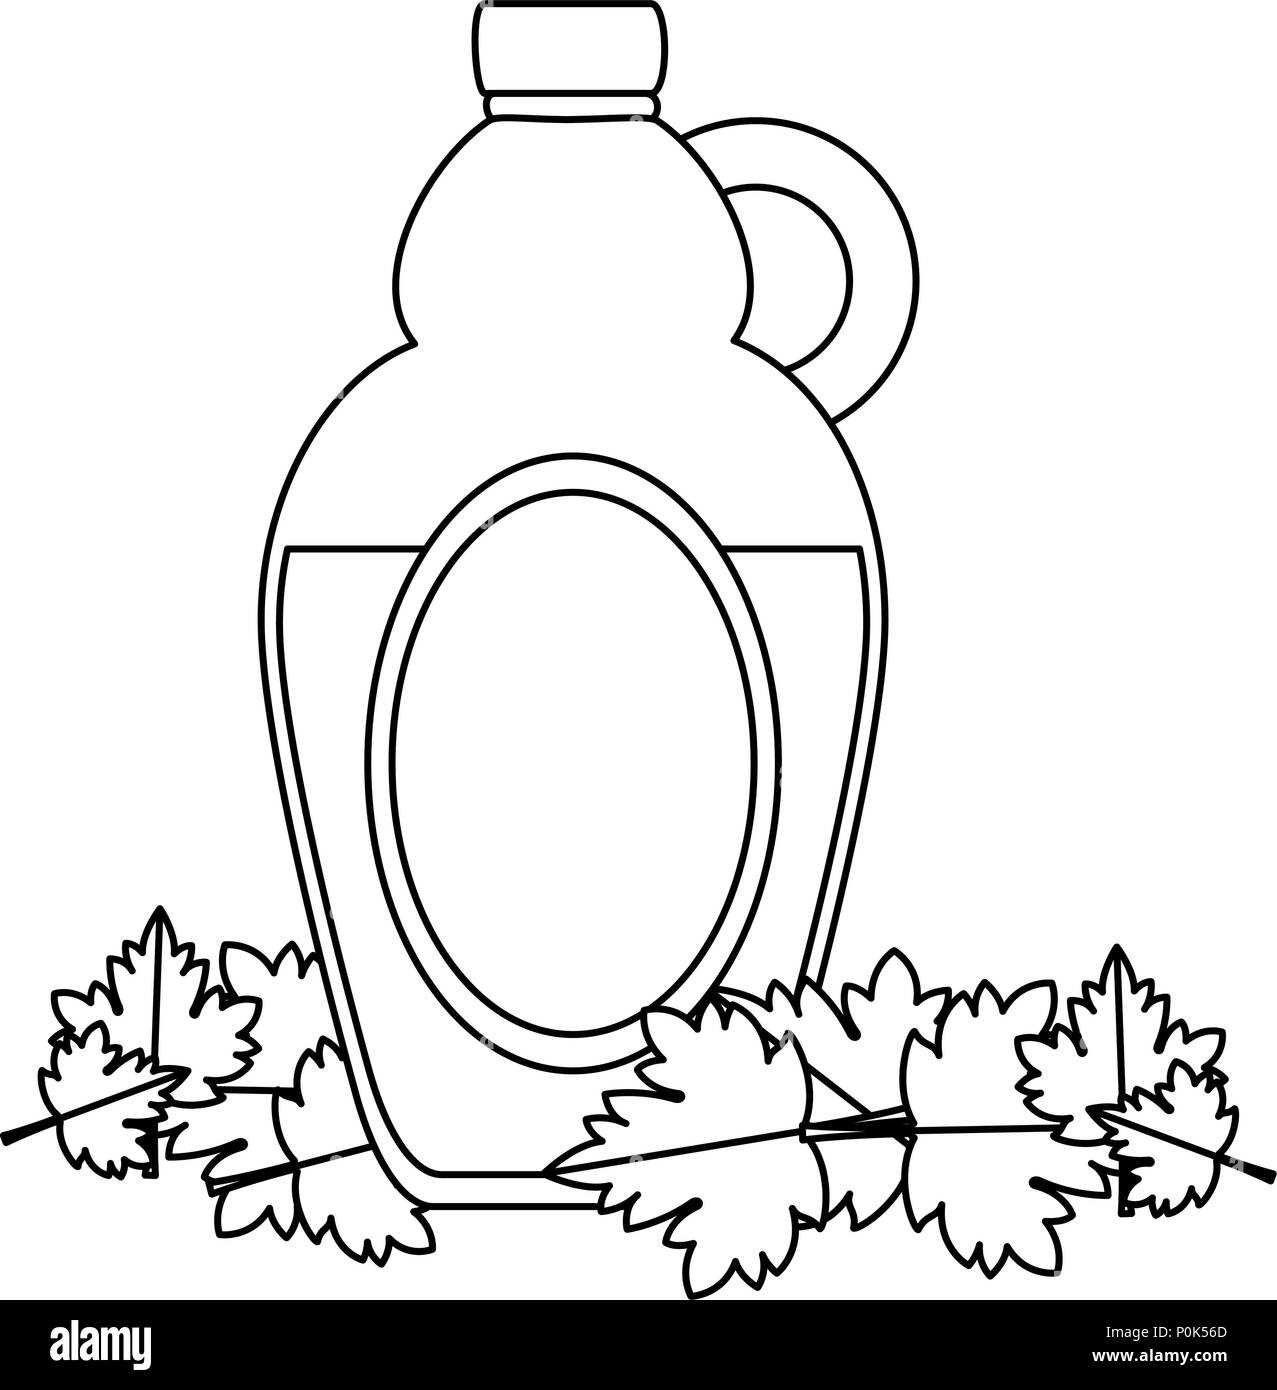 sweet maple syrup bottle and leafs Stock Vector